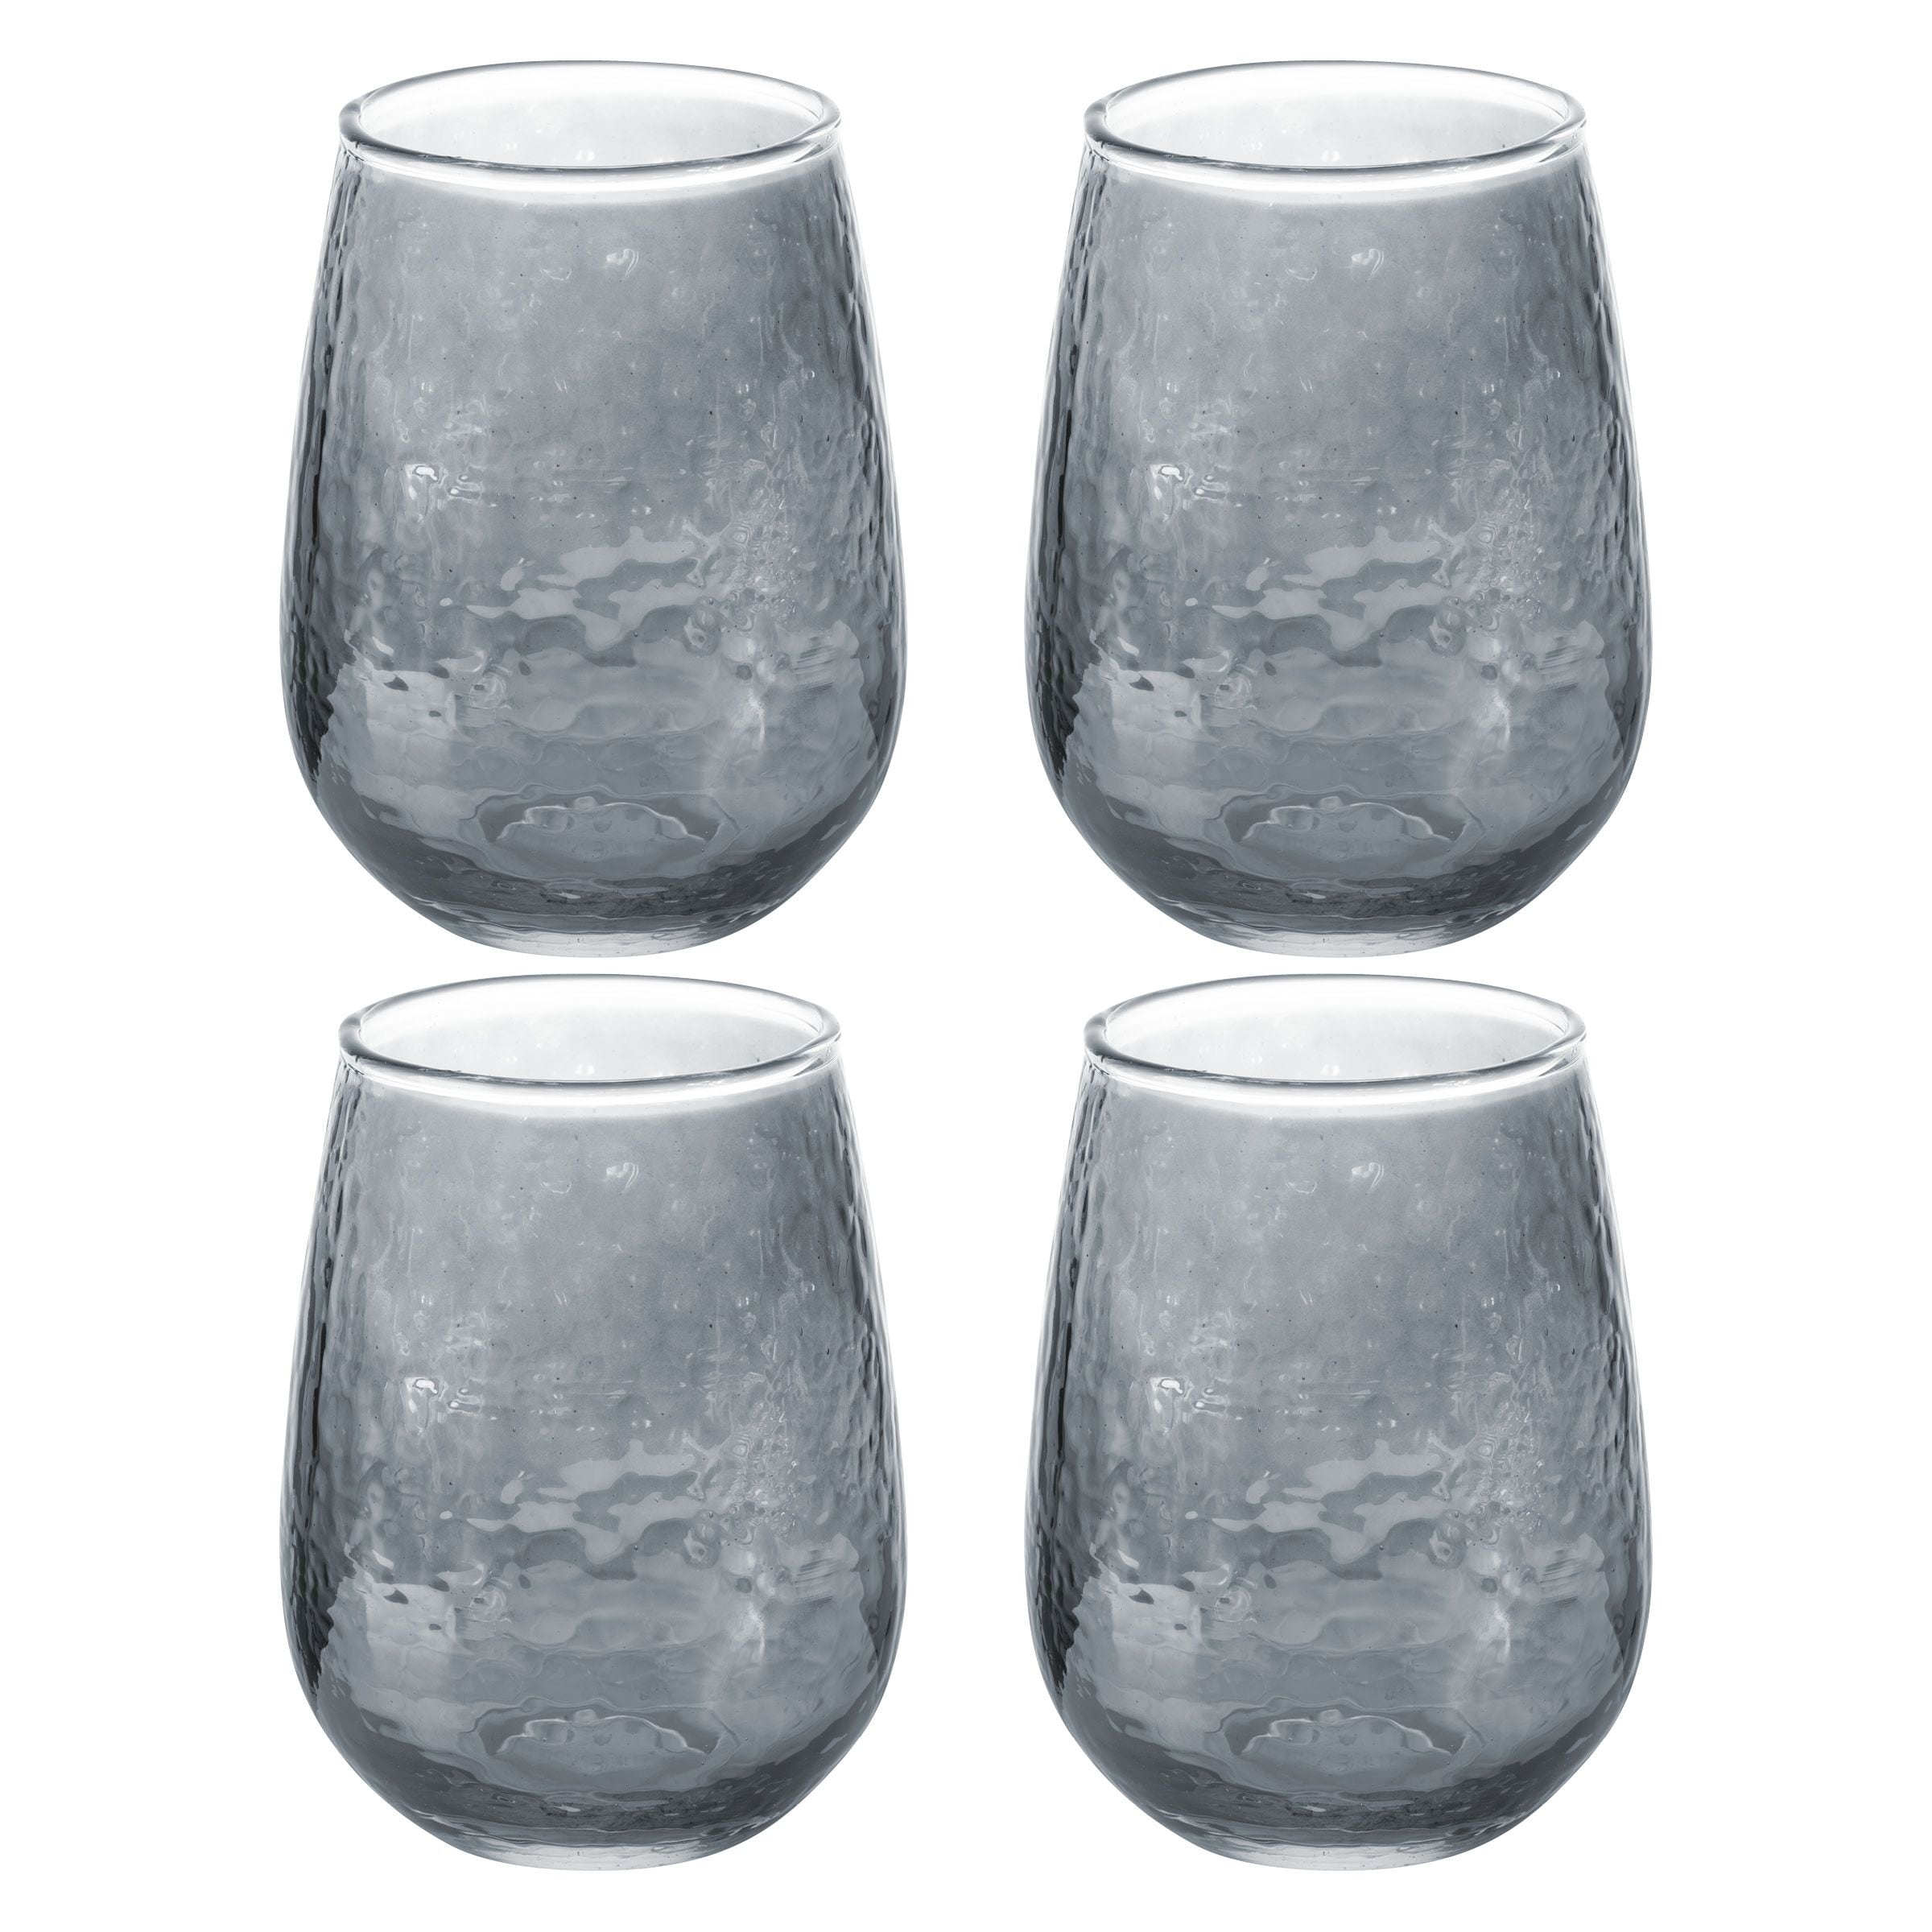 https://ak1.ostkcdn.com/images/products/is/images/direct/d4d97ef81cc3bc4b46bdce2d4425e727a4a4cb13/Catalina-Stemless-Wine-Glass-Set.jpg